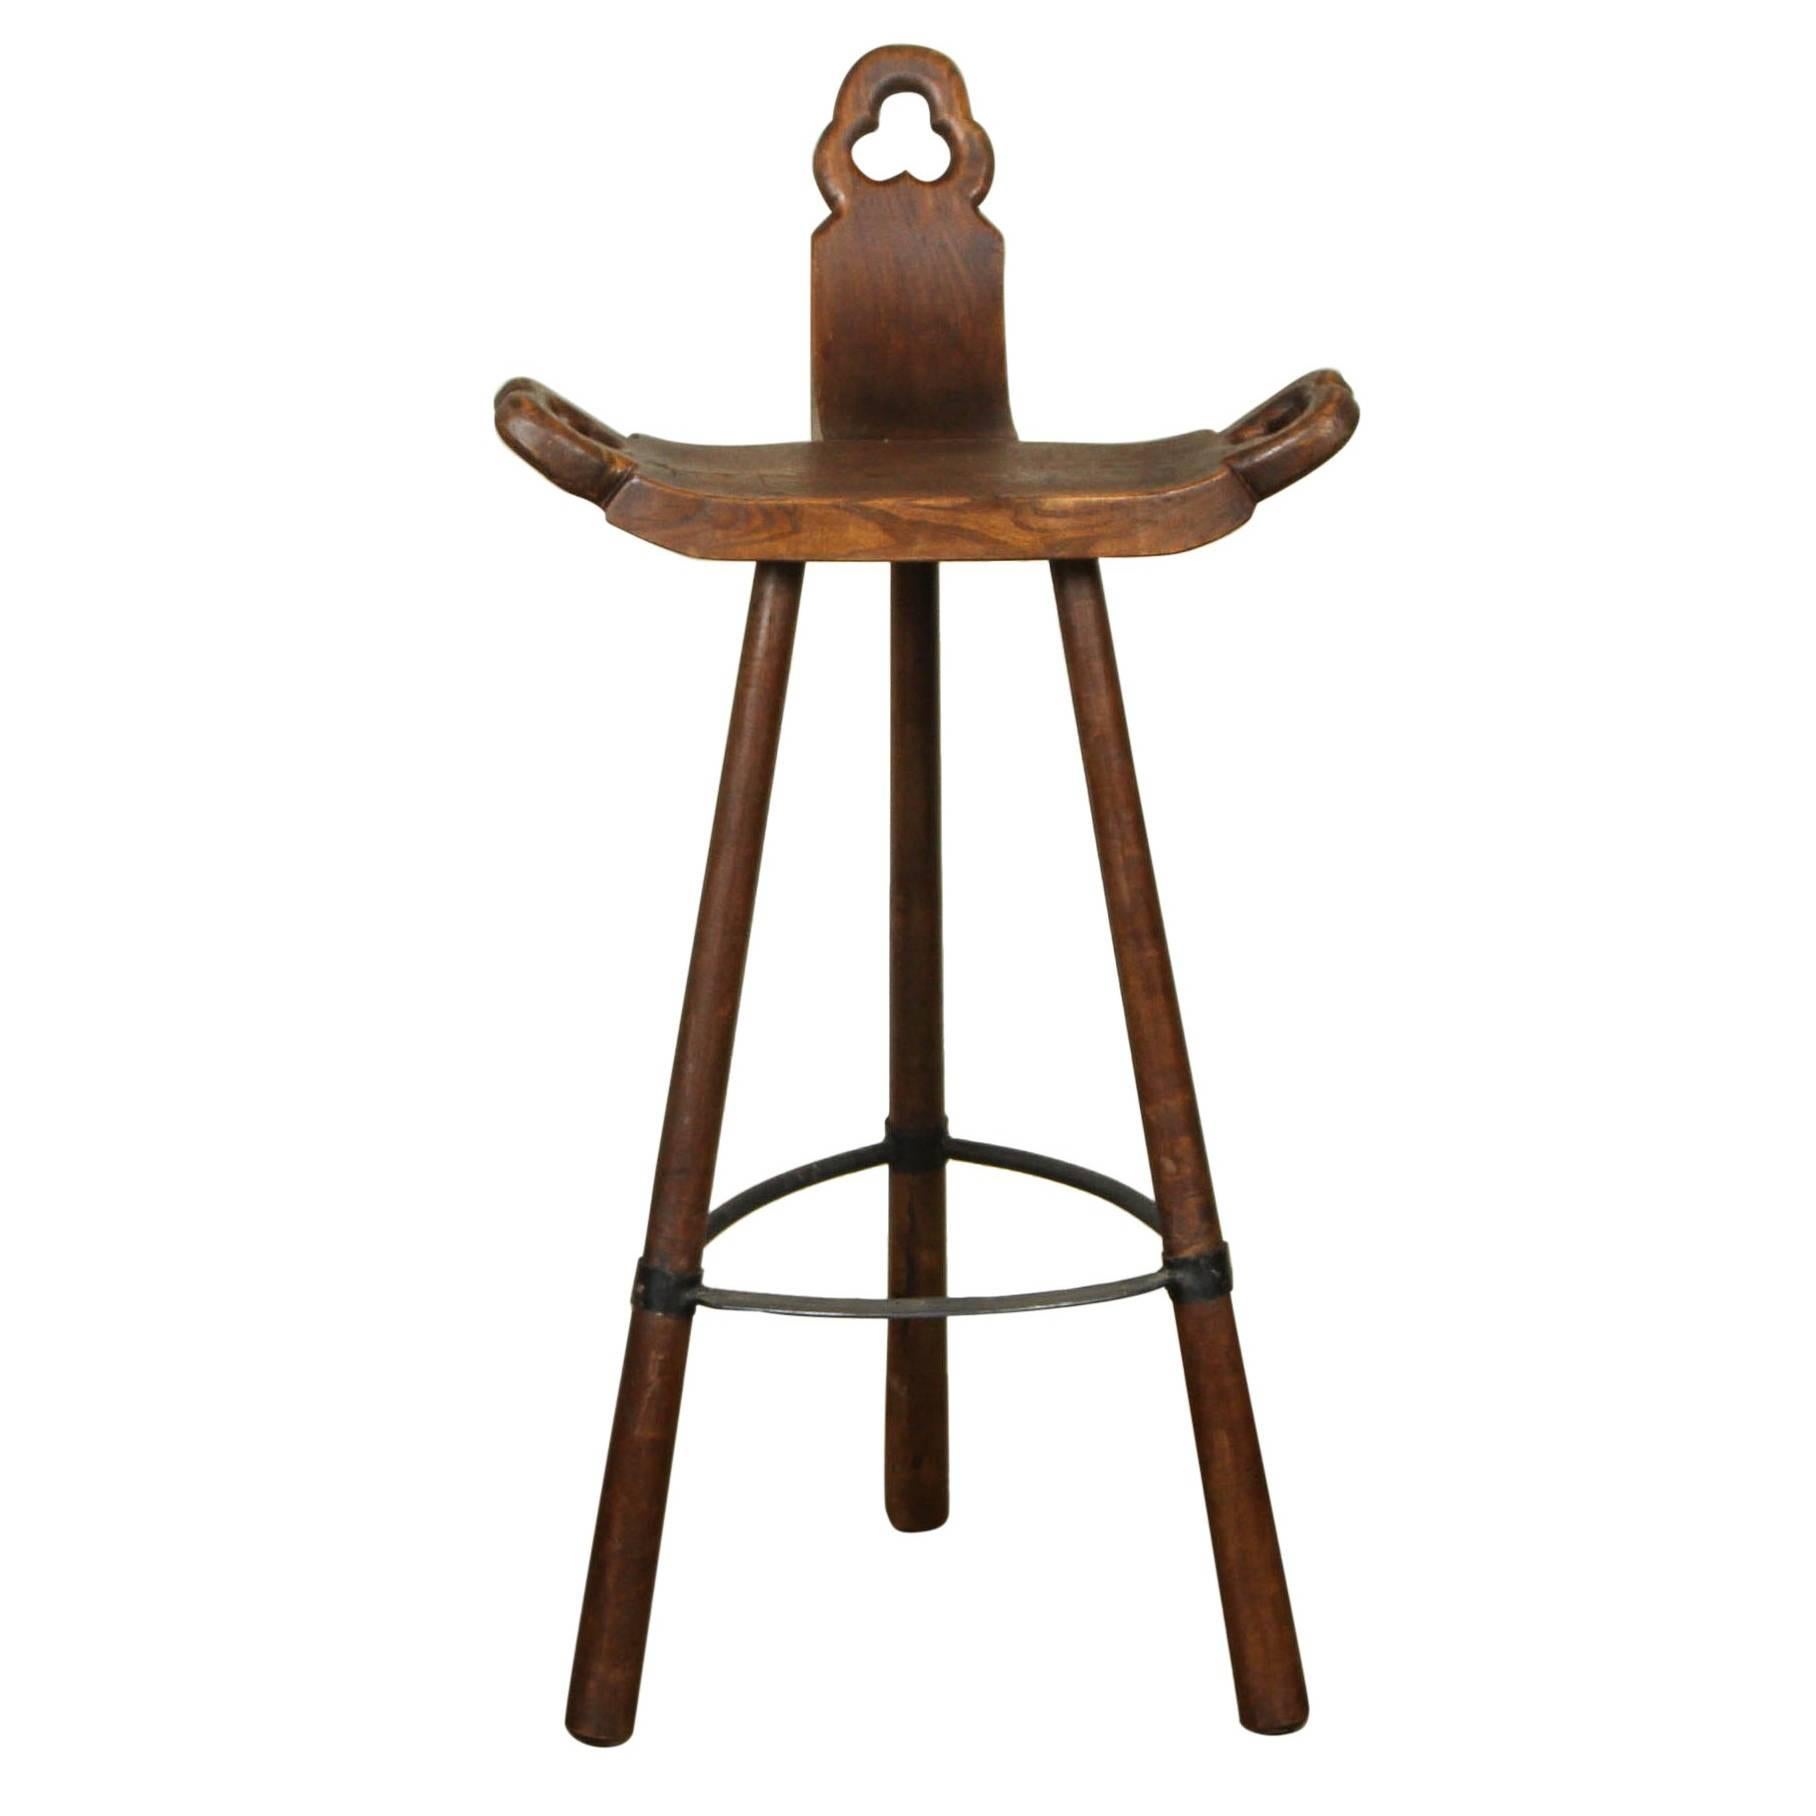 Carved Wooden and Iron Stool